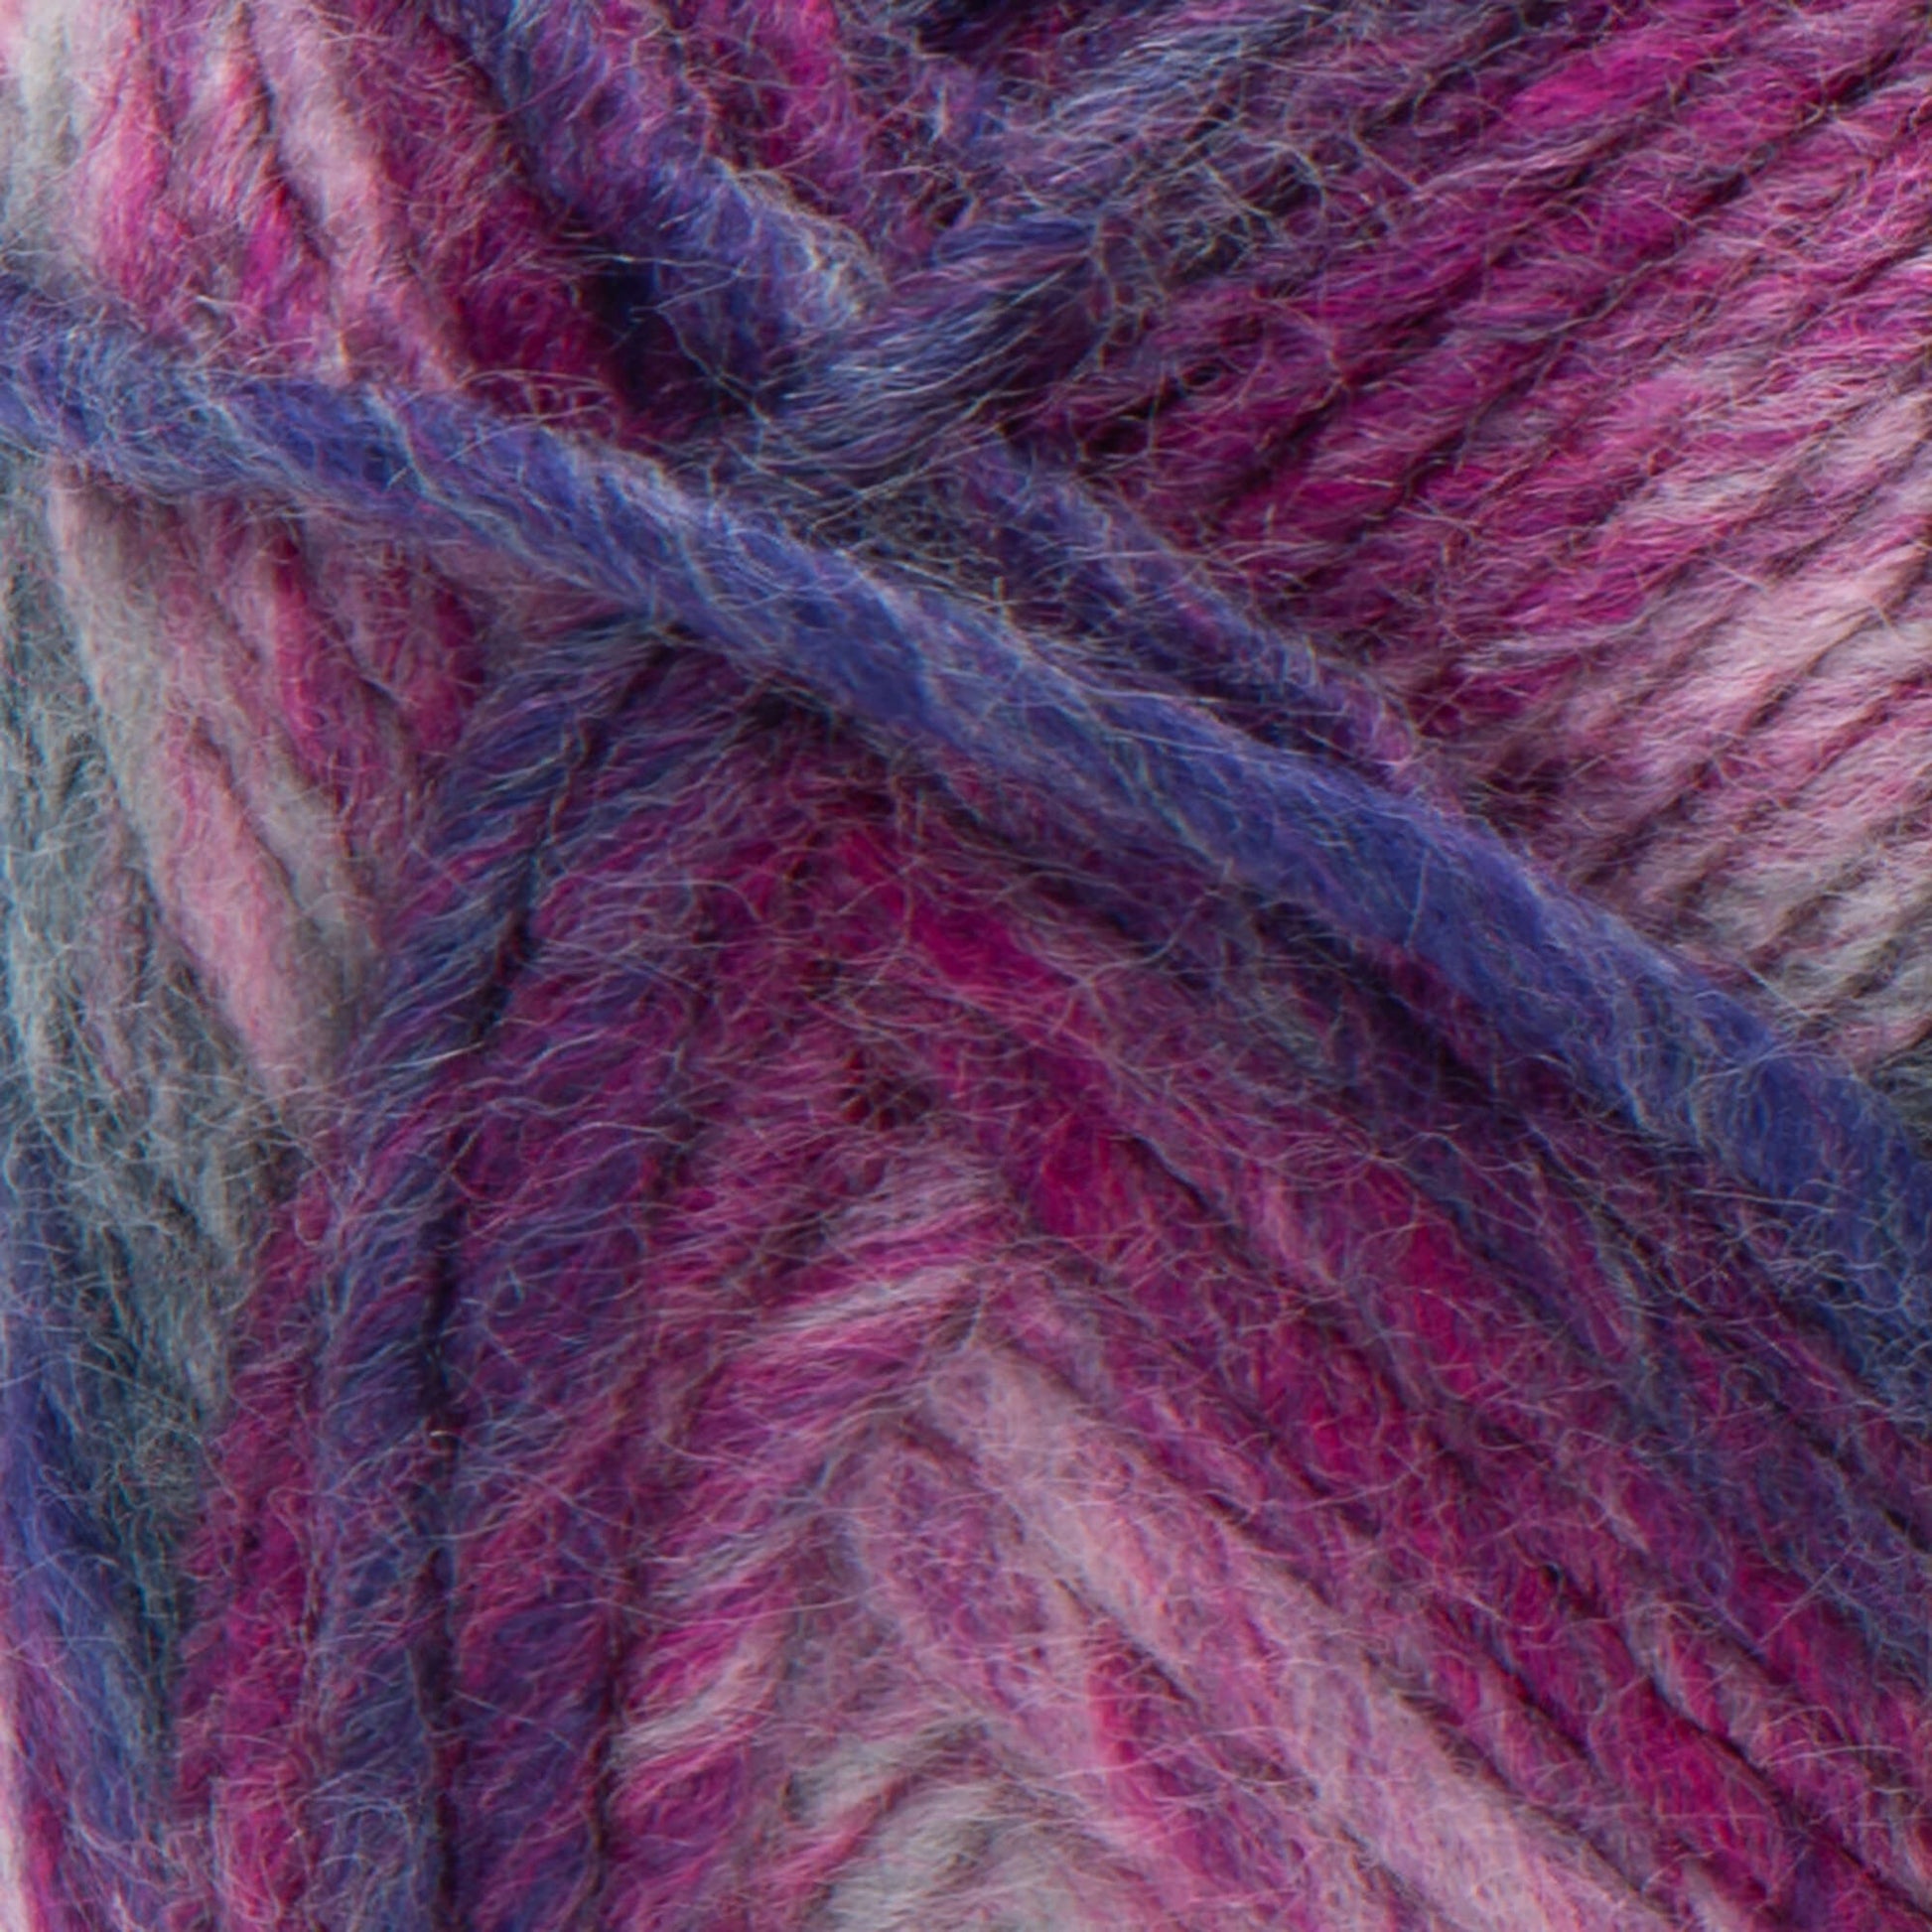 Red Heart Colorscape Yarn - Discontinued shades Montreal